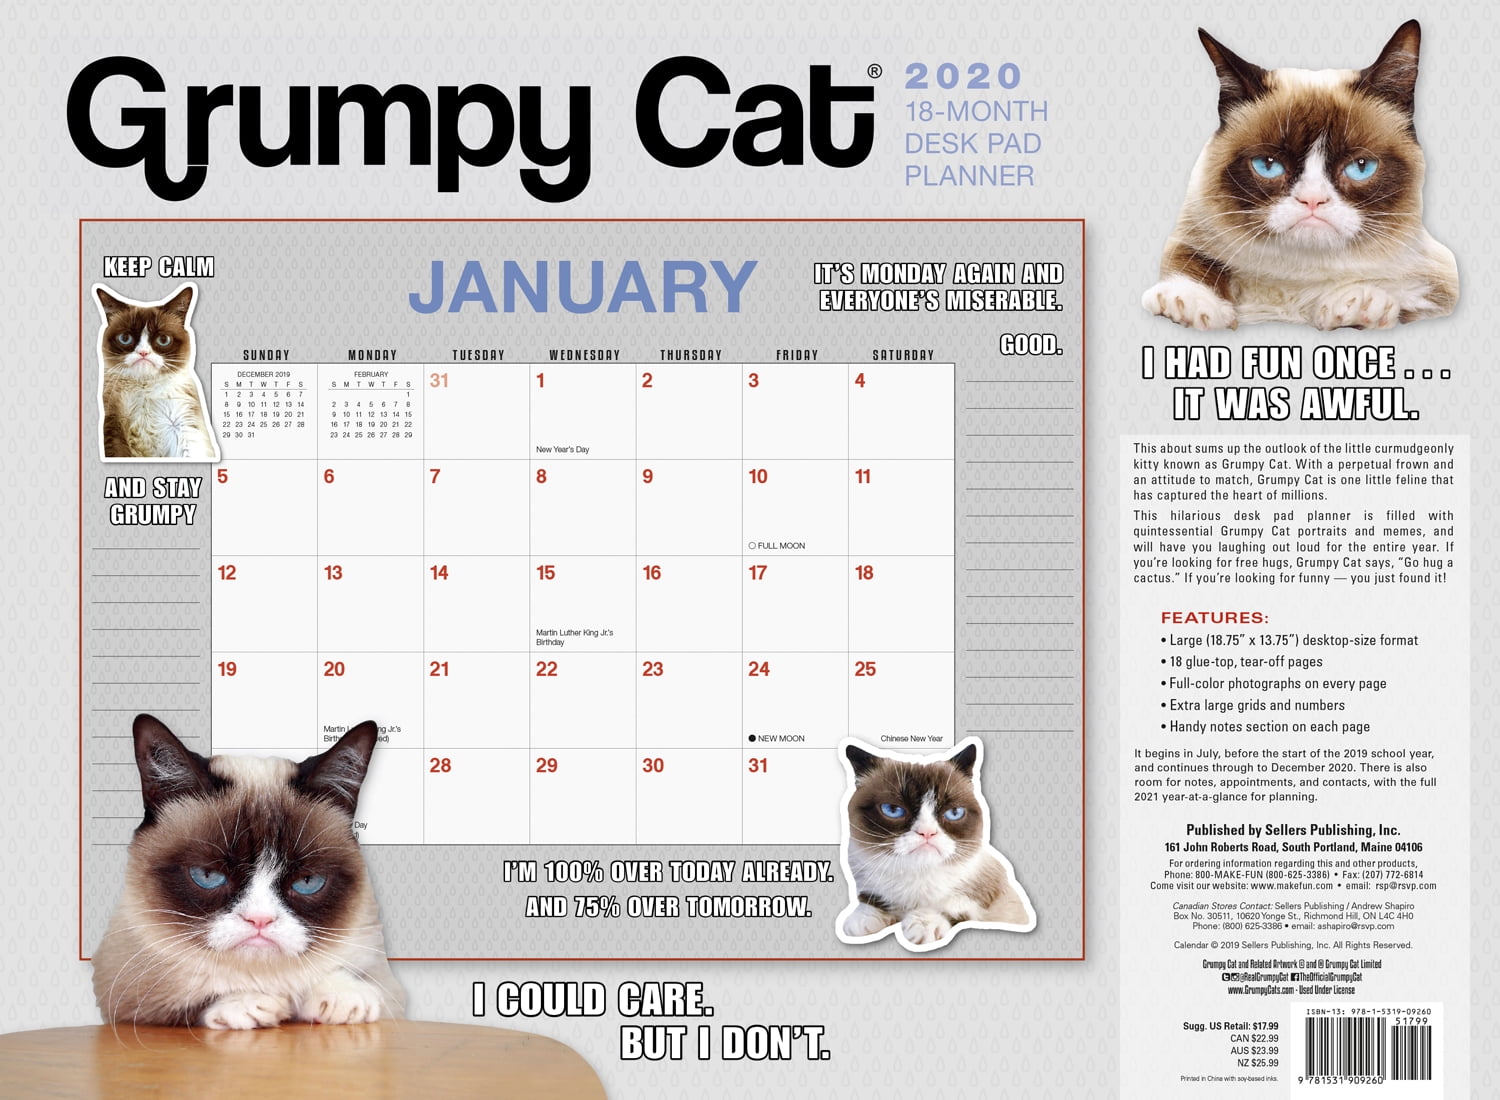 2020-grumpy-cat-18-month-desk-pad-planner-by-sellers-publishing-other